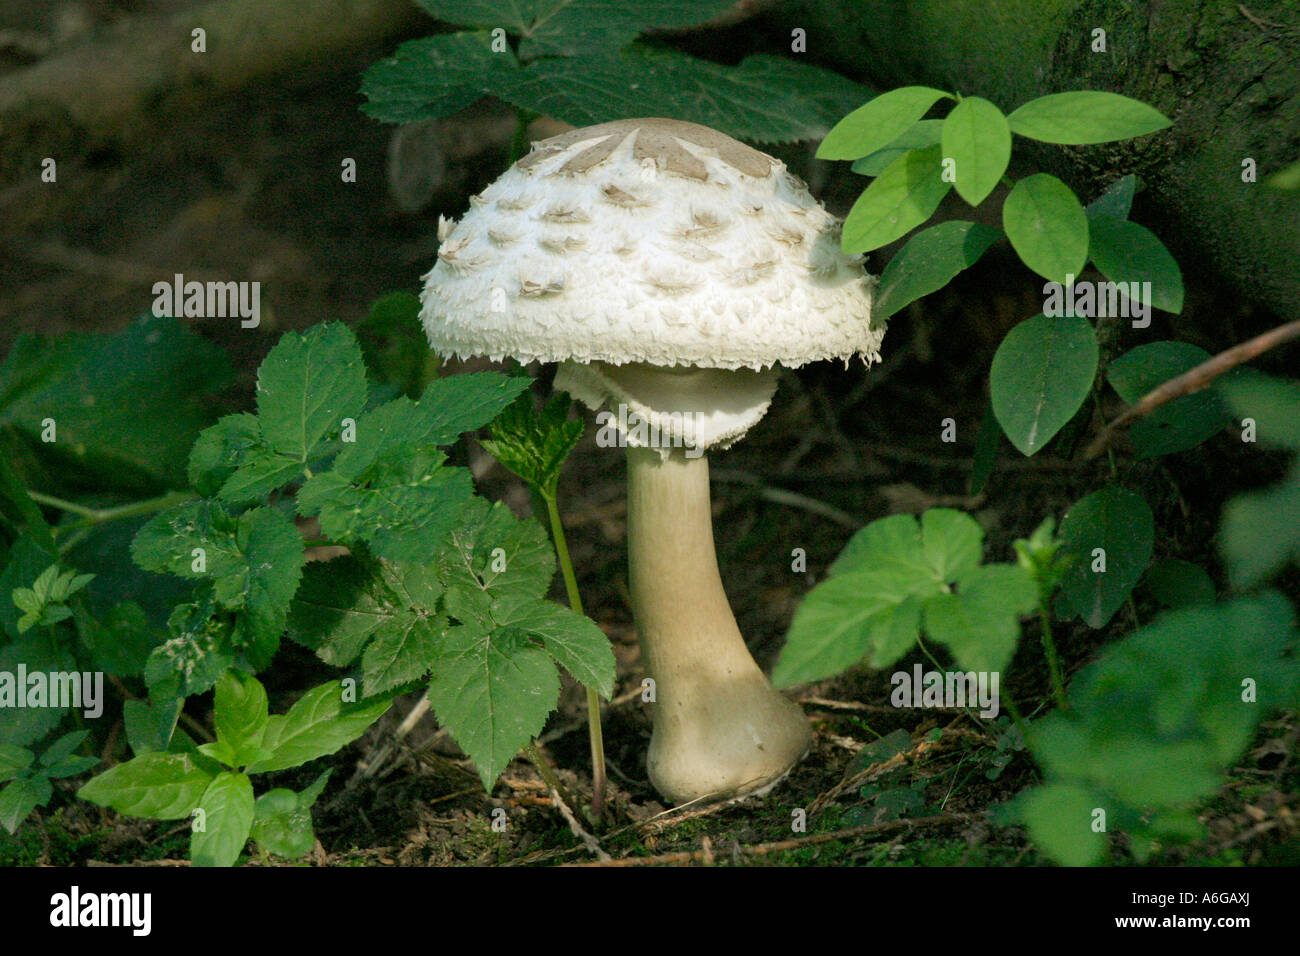 Schirmpilz High Resolution Stock Photography and Images - Alamy